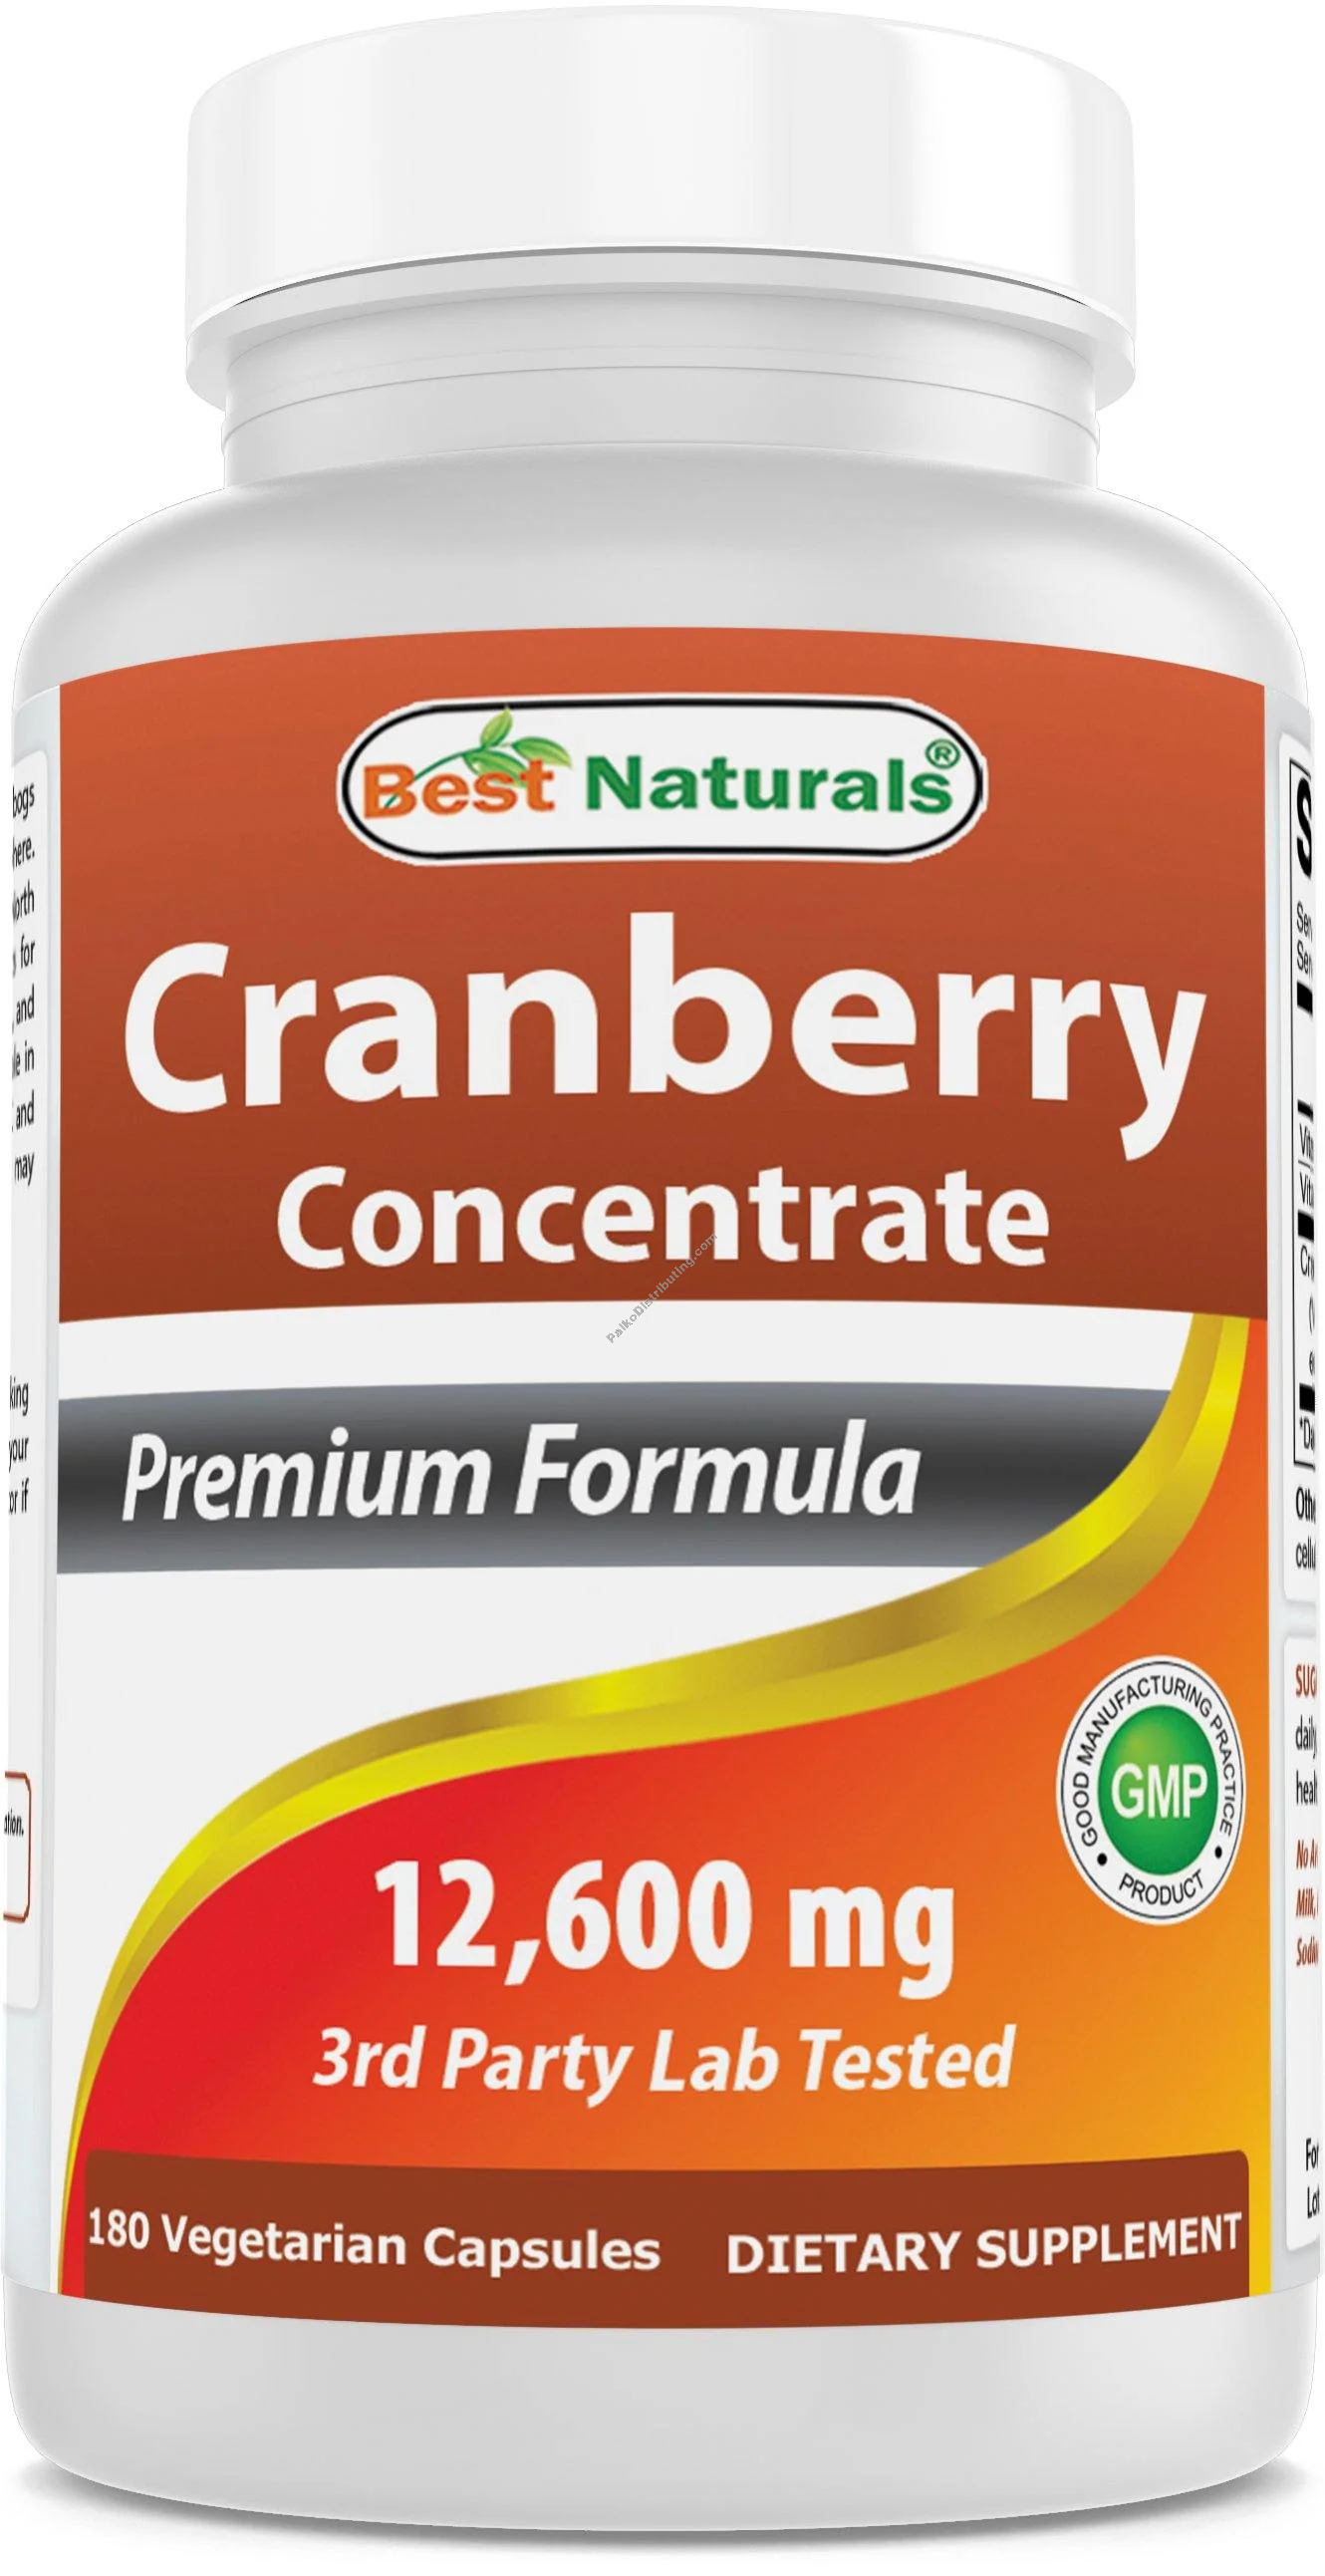 Product Image: Cranberry Concentrate 12600 mg